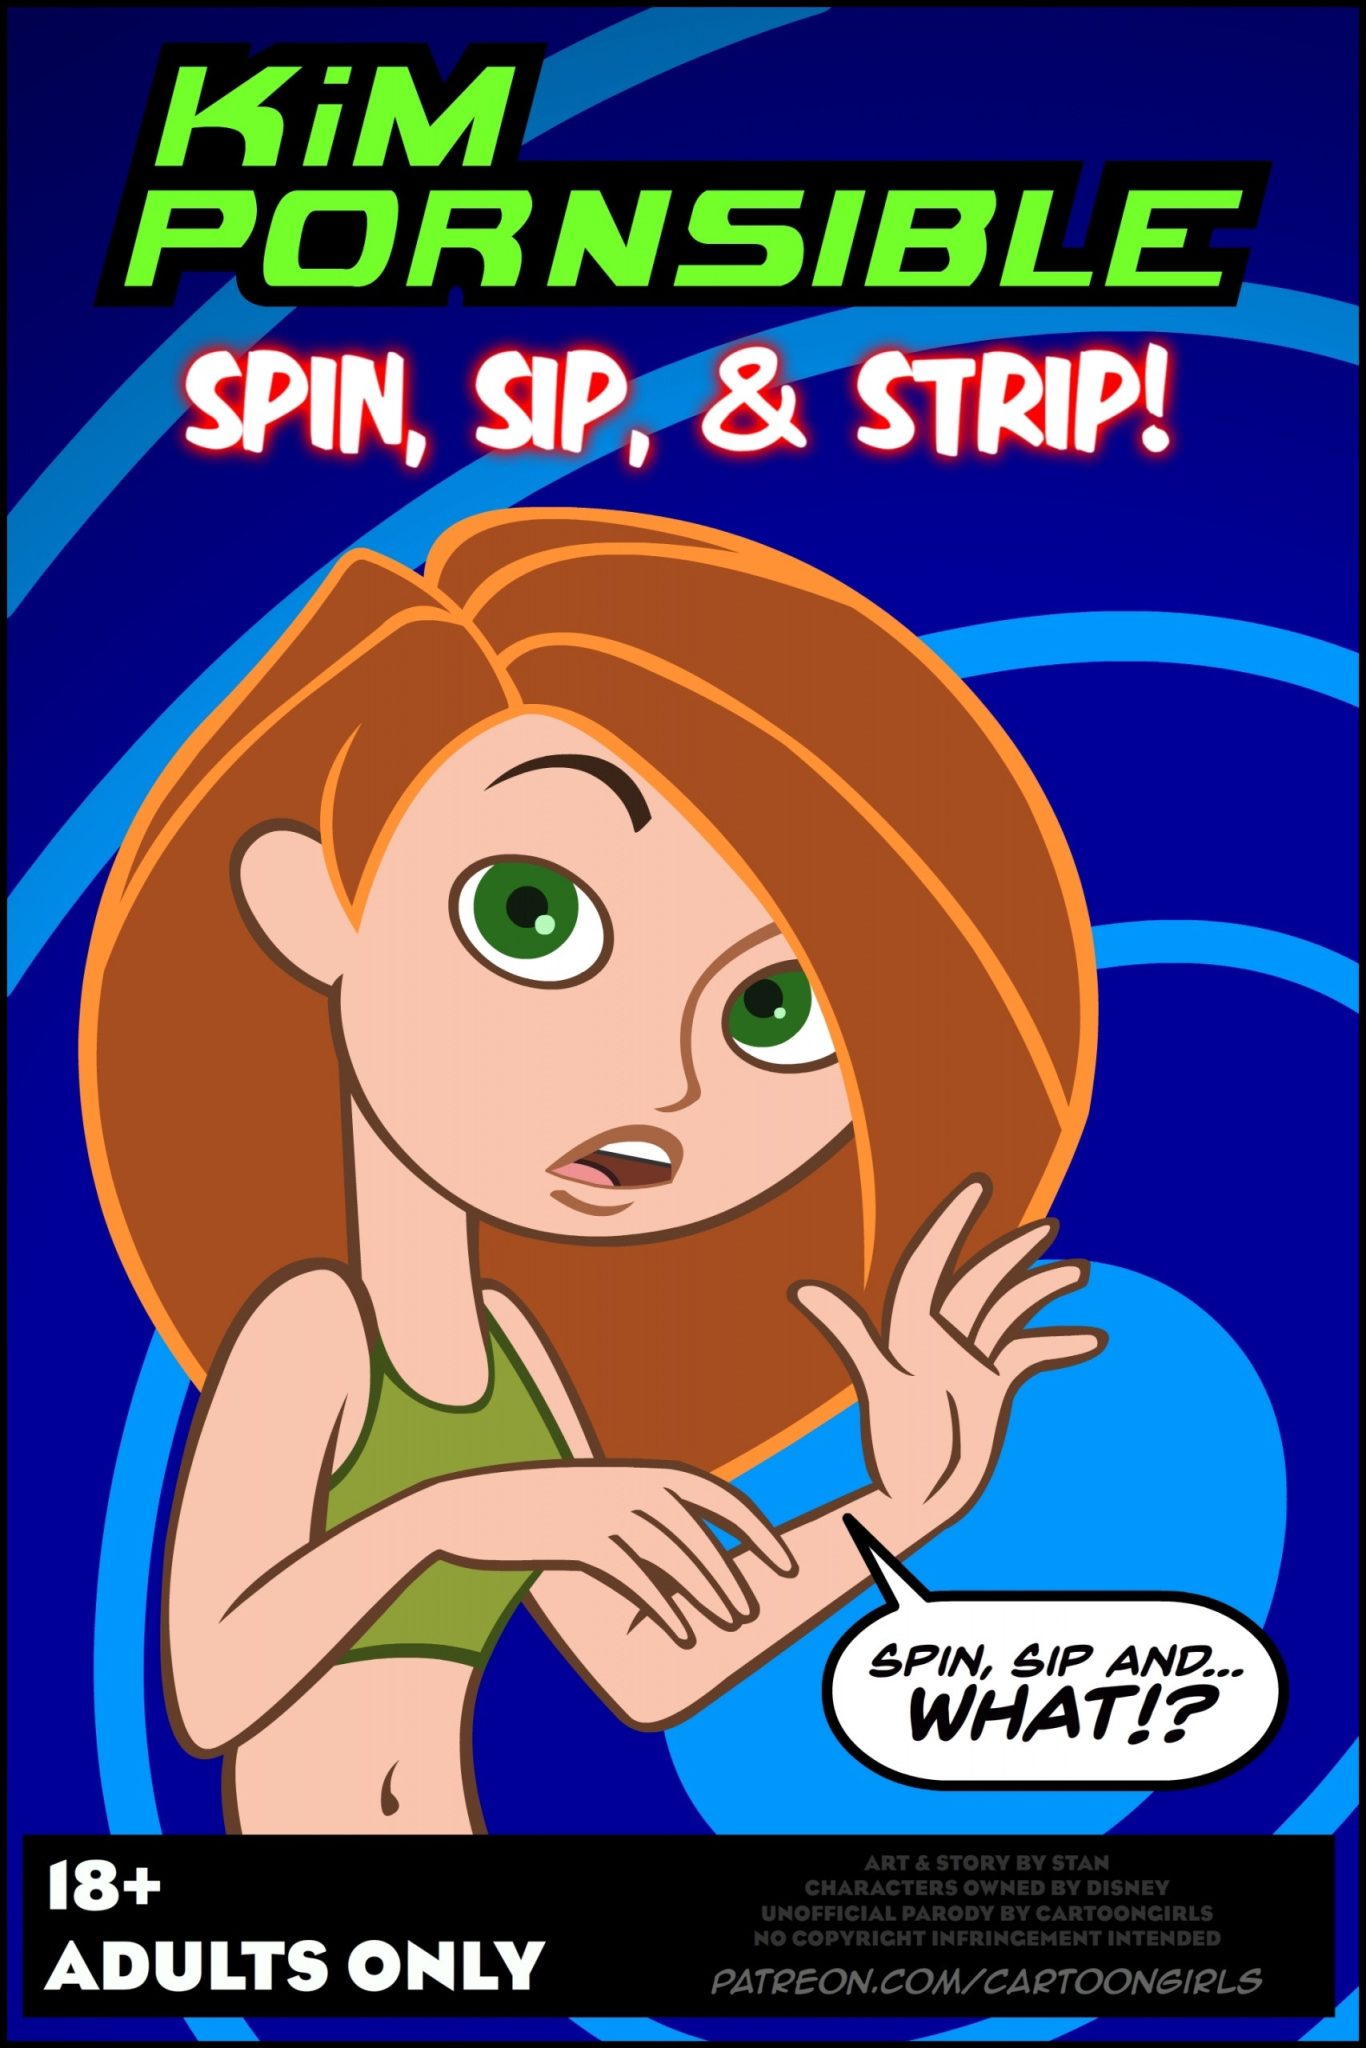 Kim Possible Spin, Sip & Strip!